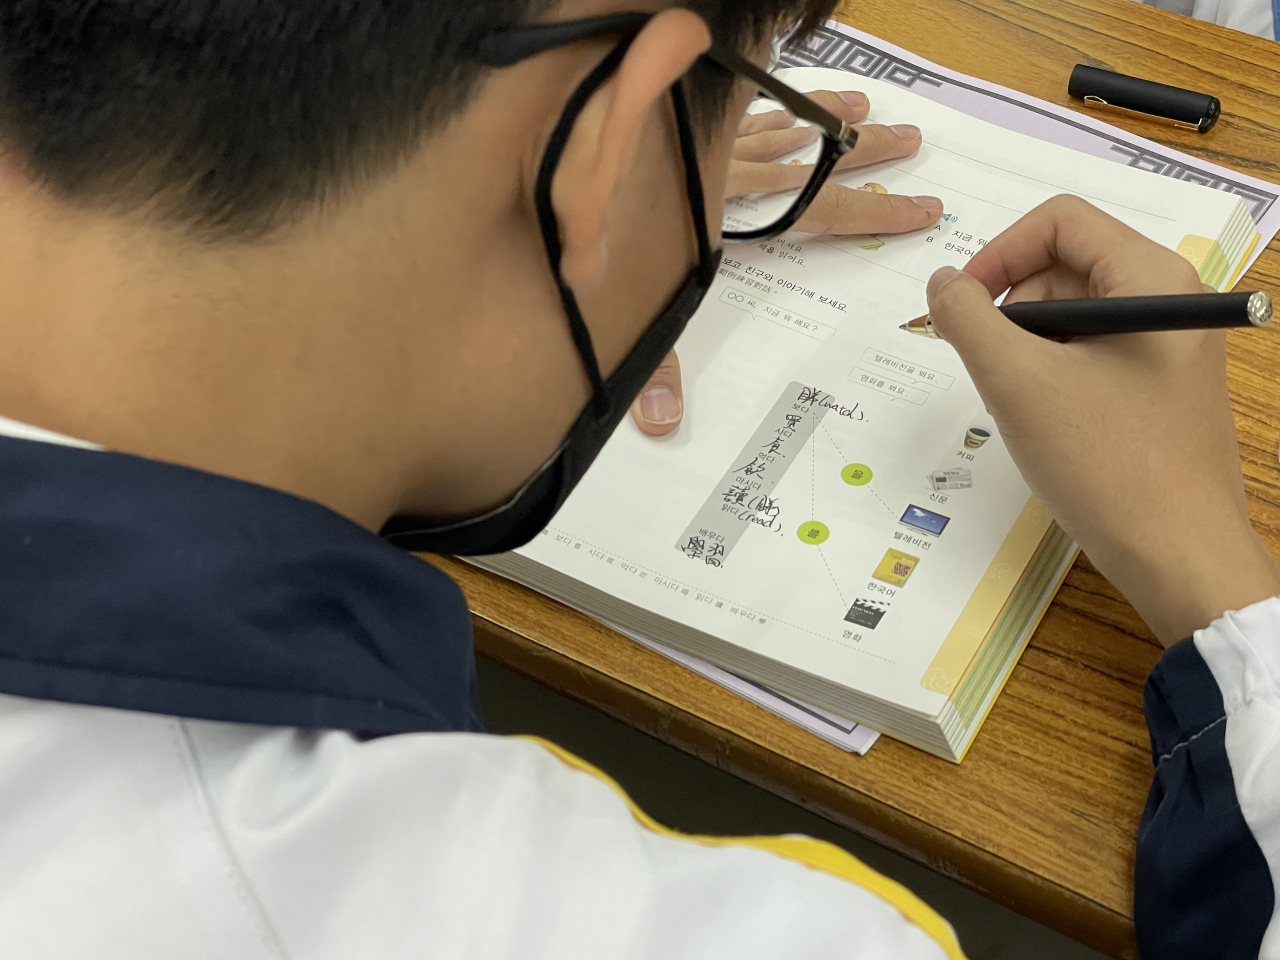 A student completes an exercise in Korean class at Mu Kuang English School in Hong Kong on March 21. (Naomi Ng/The Korea Herald)